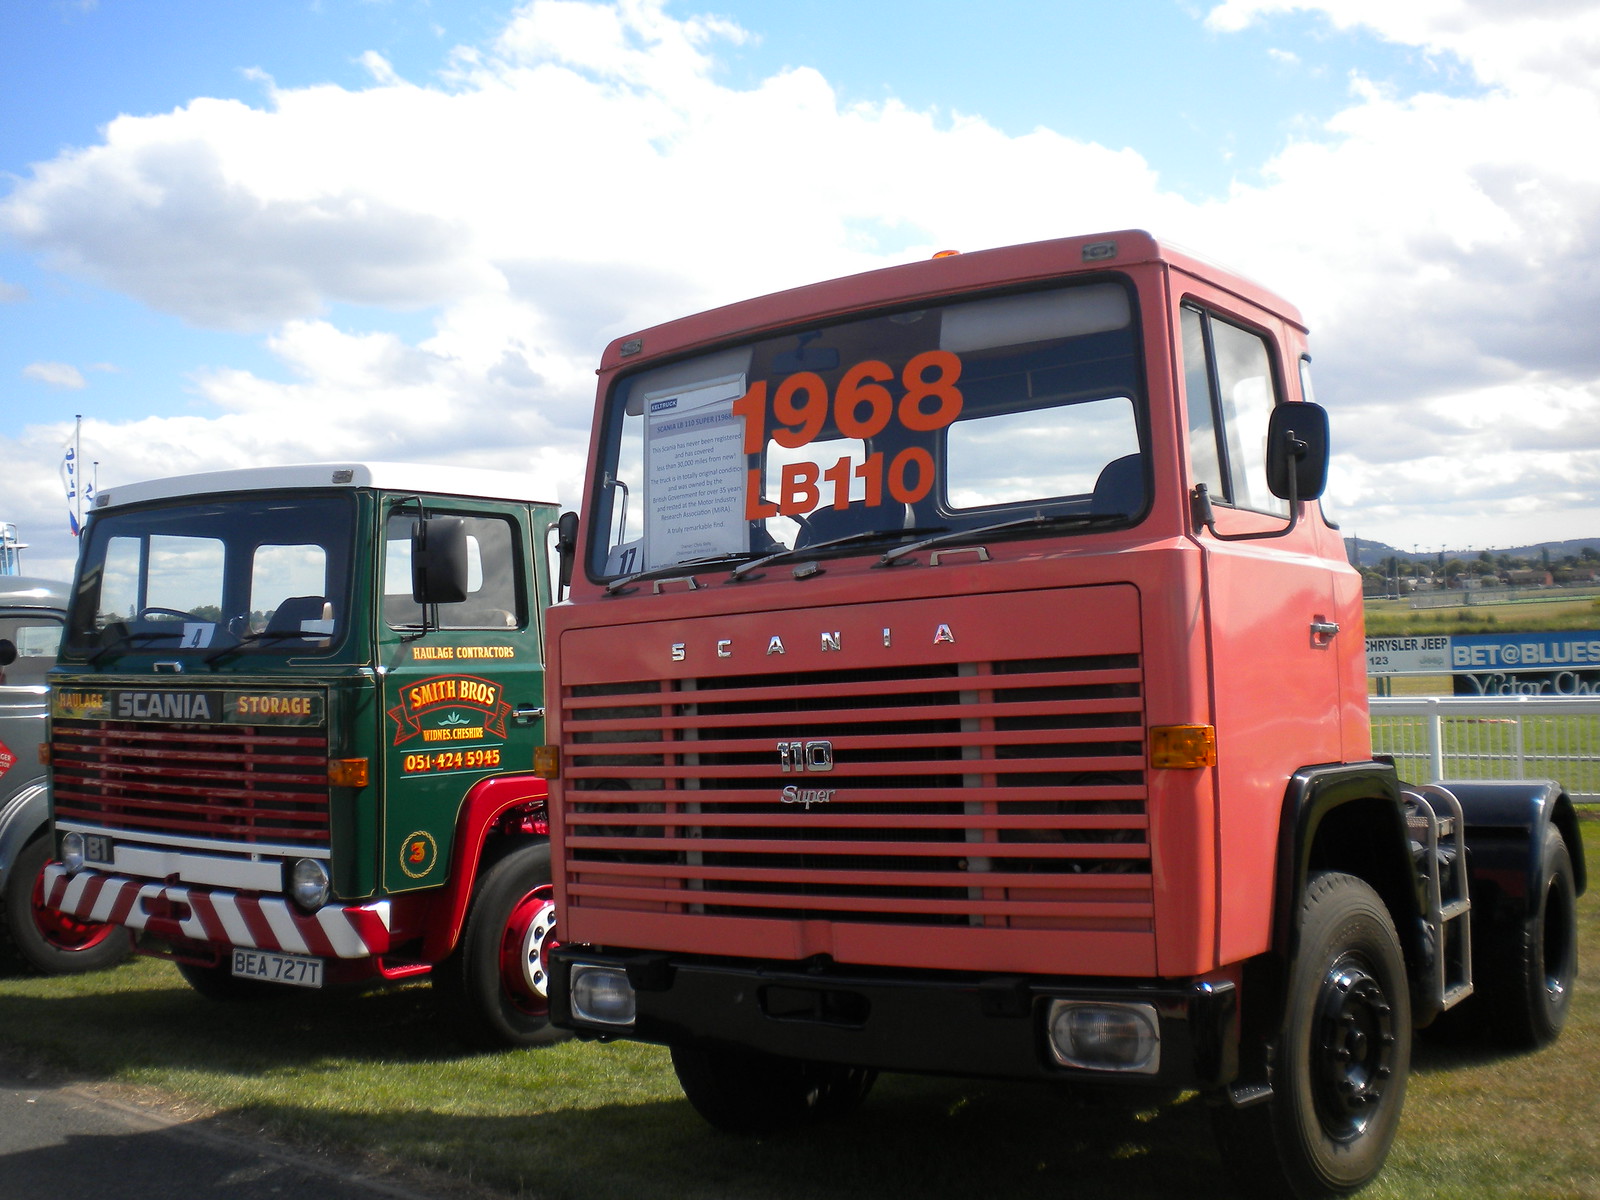 Hereford Truck Show 2011